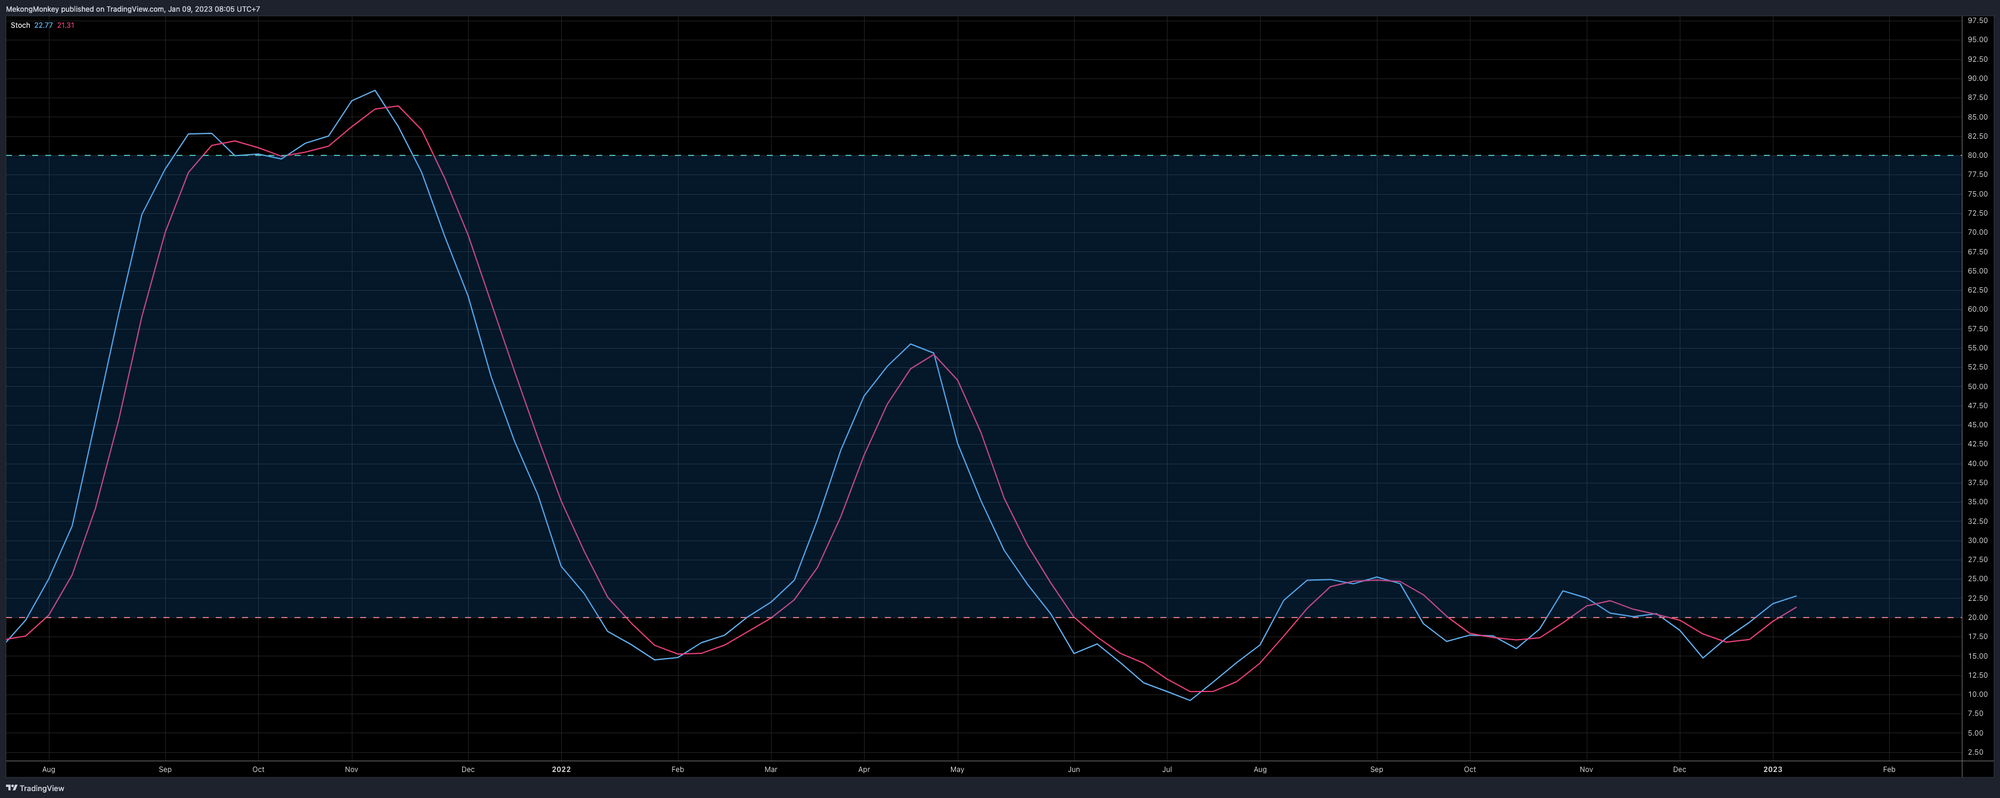 The stochastic oscillator escaping oversold conditions.